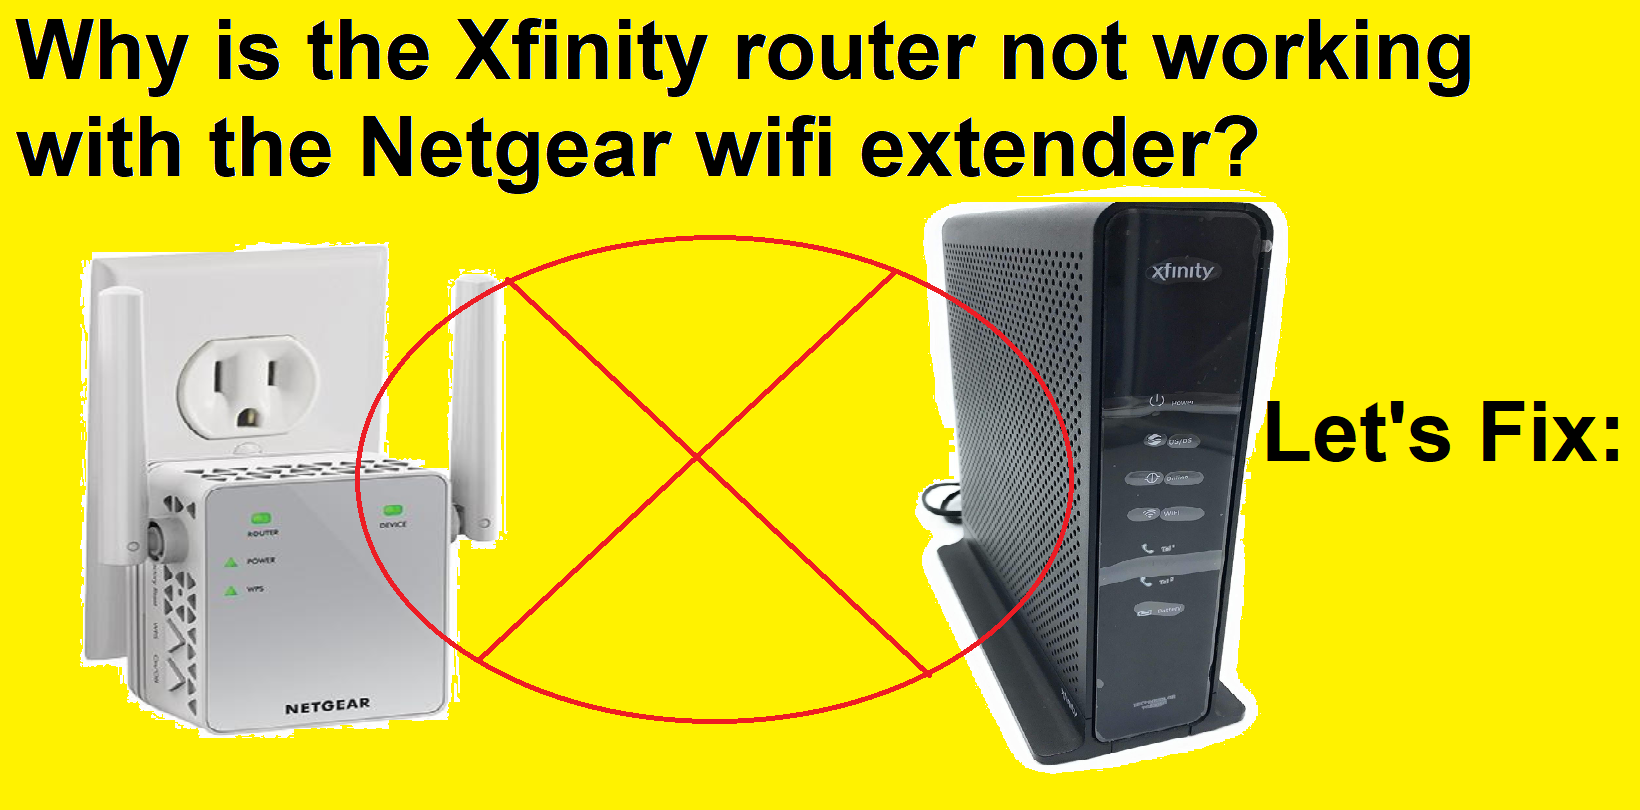 You are currently viewing Why is the Xfinity router not working with the Netgear wifi extender?